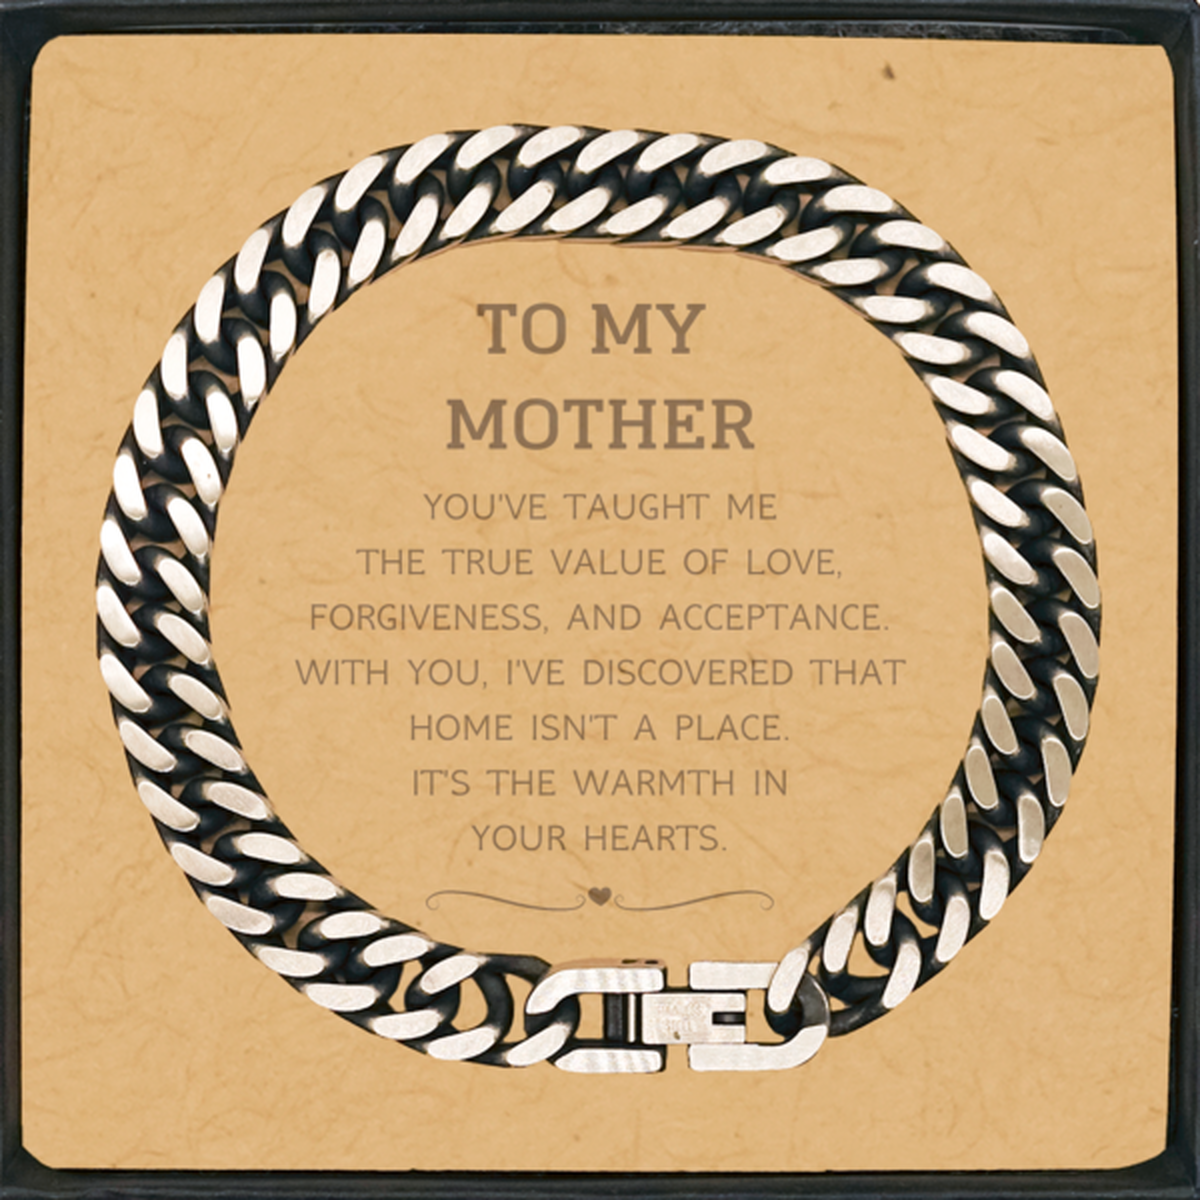 To My Mother Gifts, You've taught me the true value of love, Thank You Gifts For Mother, Birthday Cuban Link Chain Bracelet For Mother